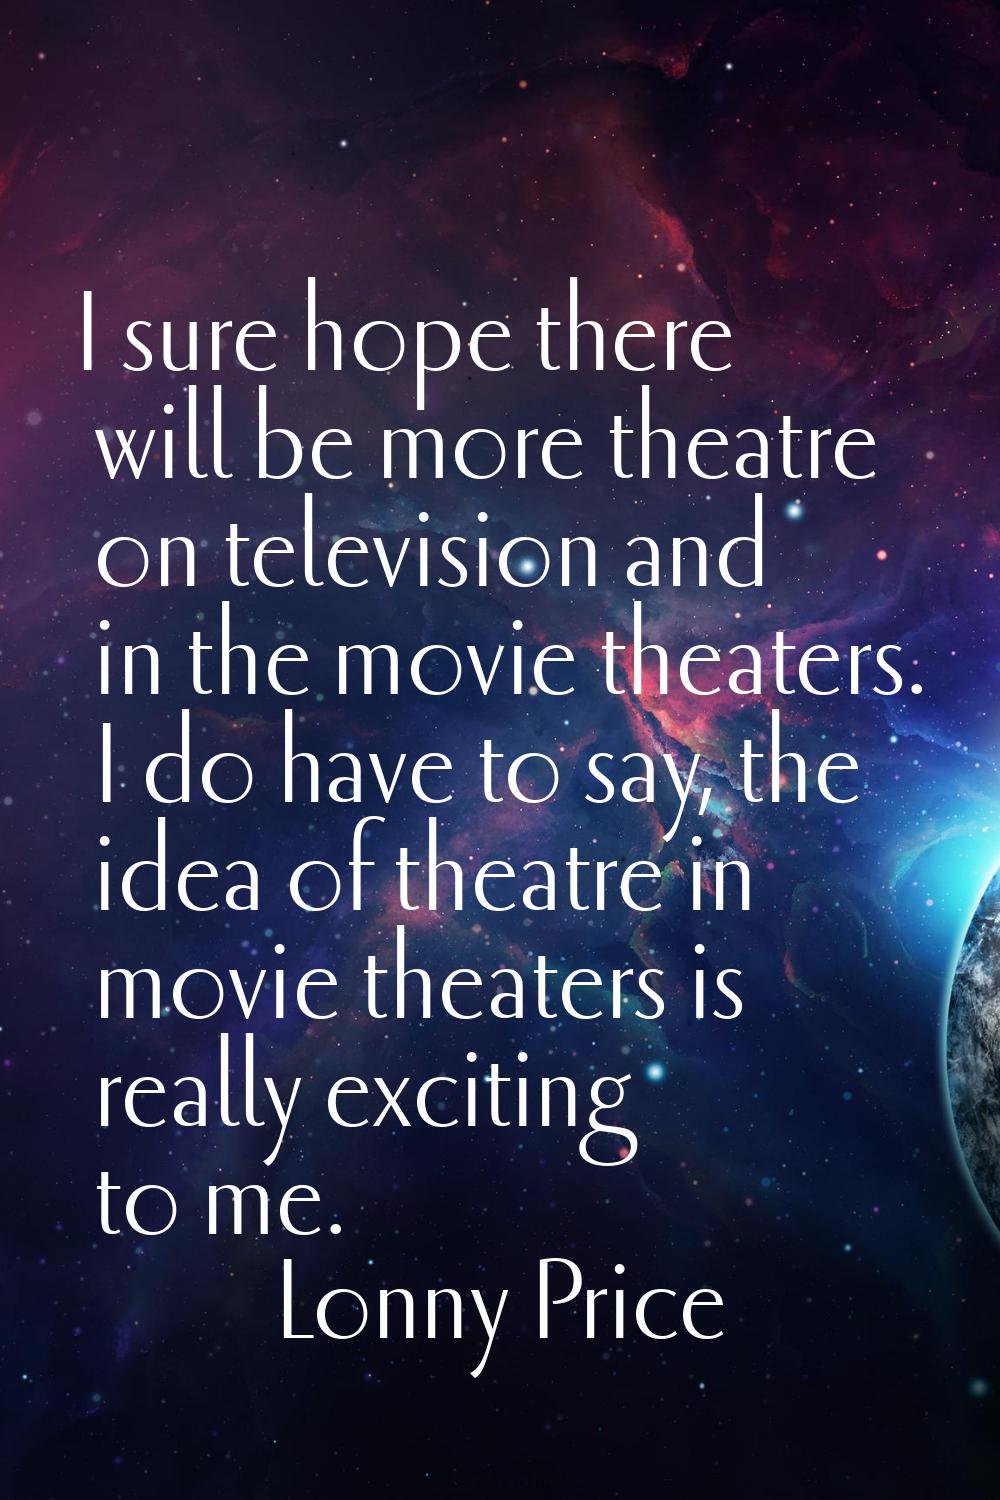 I sure hope there will be more theatre on television and in the movie theaters. I do have to say, t